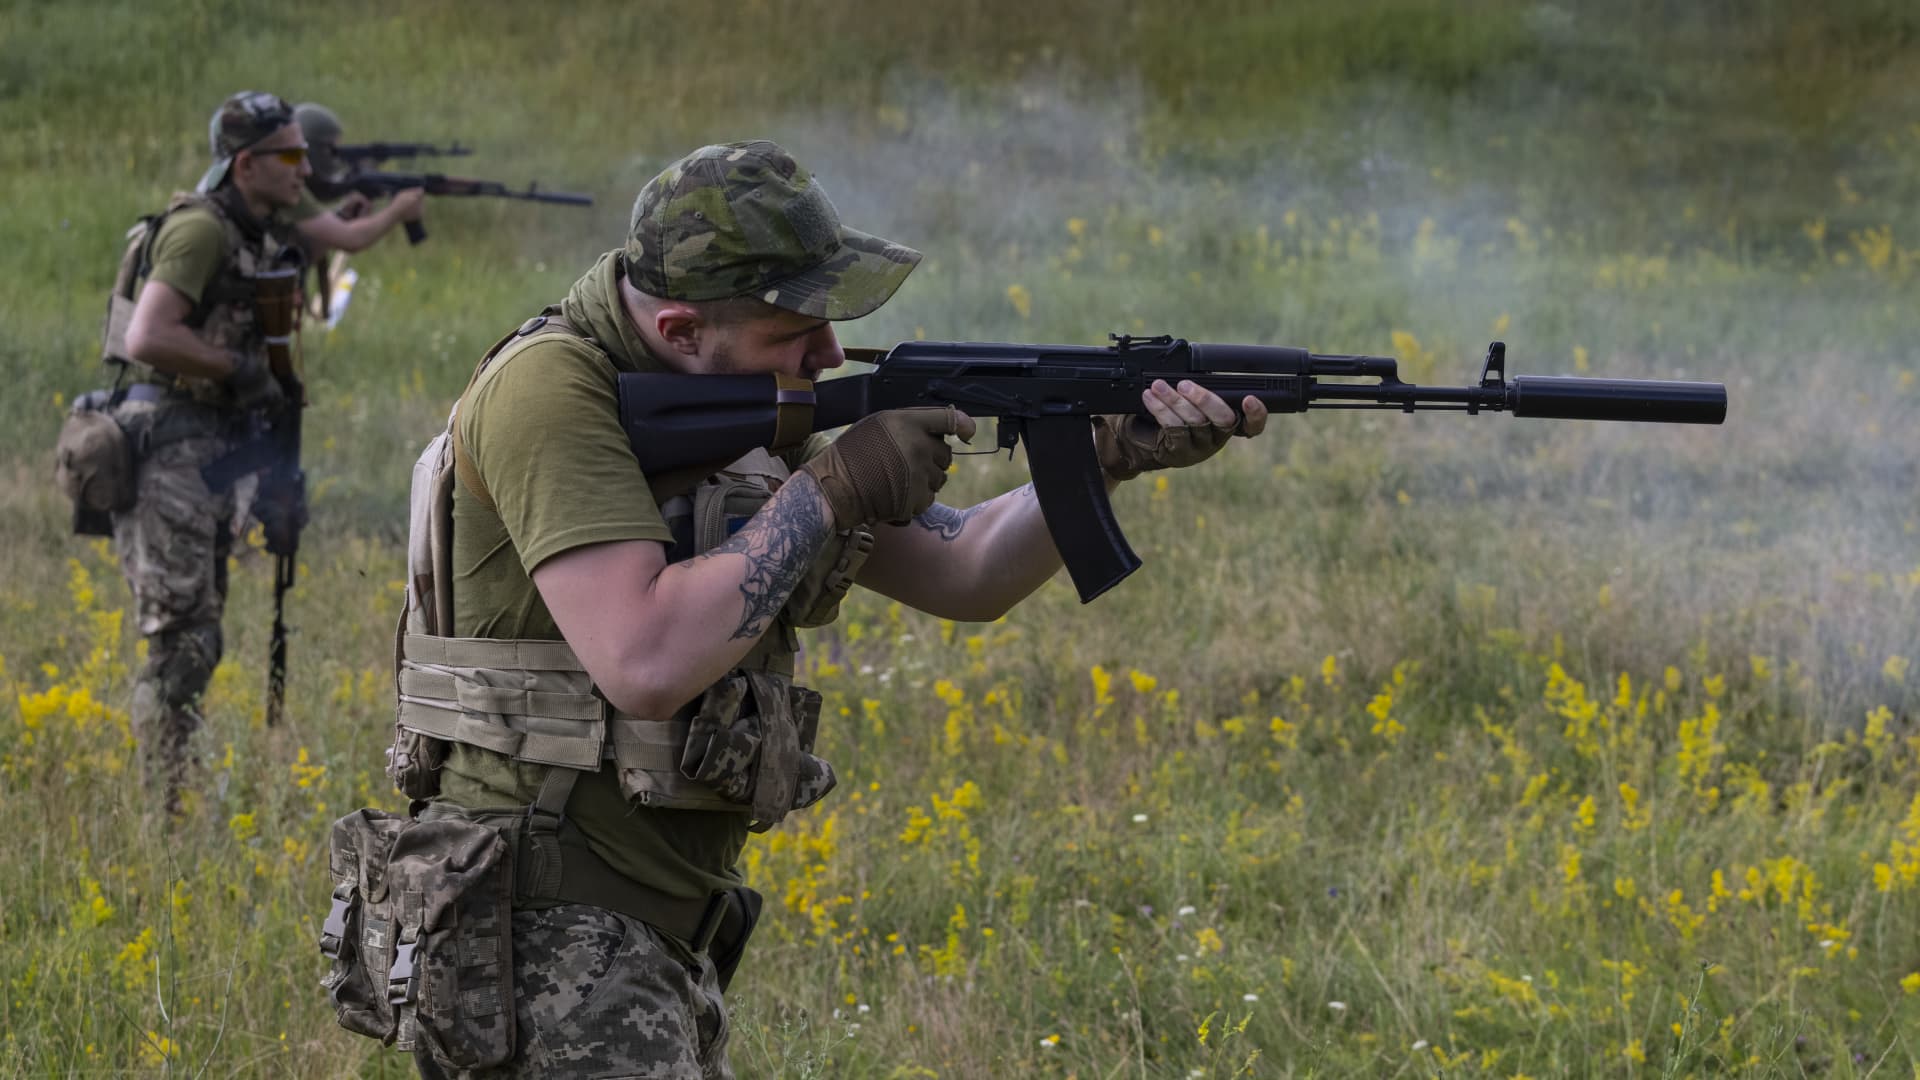 Azov Regiment soldiers fire weapons during target practice on June 28, 2022 in the Kharkiv region, Ukraine. The U.K. will provide another 1 billion pounds ($1.2 billion) of military support to Ukraine, Reuters said citing the British government.